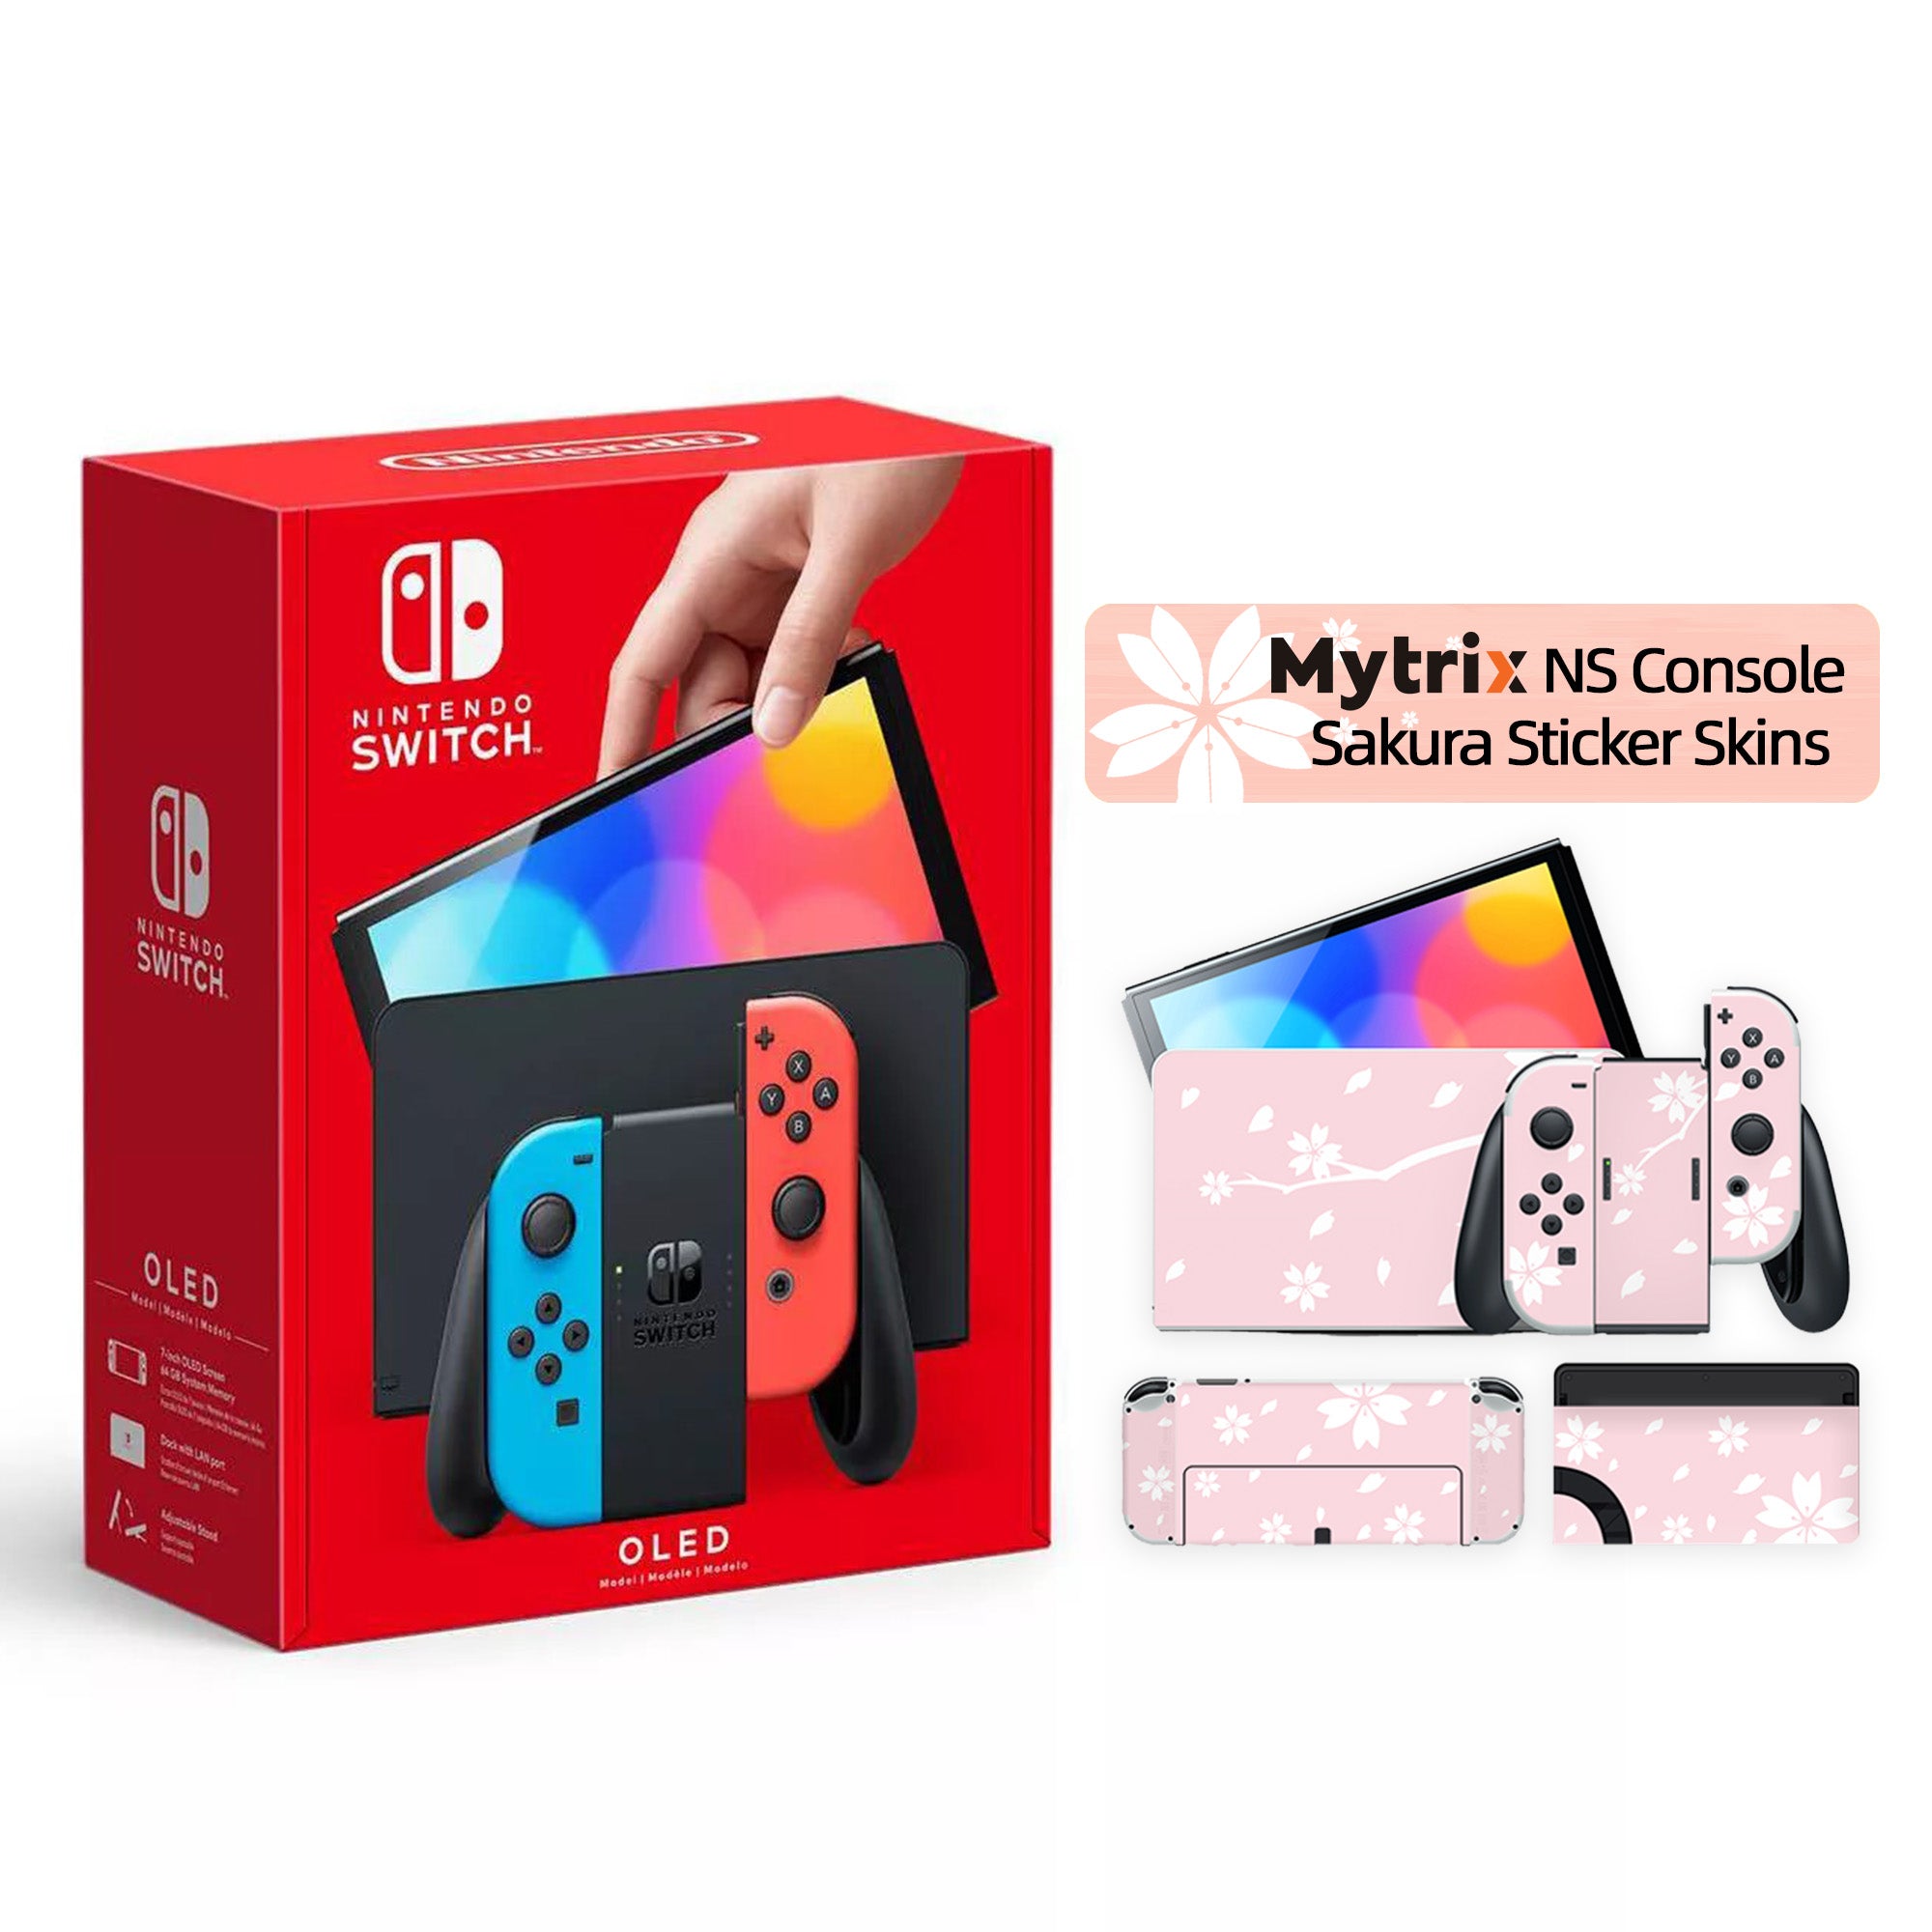 2021 New Nintendo Switch OLED Model Neon Red Blue with Mytrix Full Body Skin for NS OLED Console, Dock & Joycons - Sakura Pink